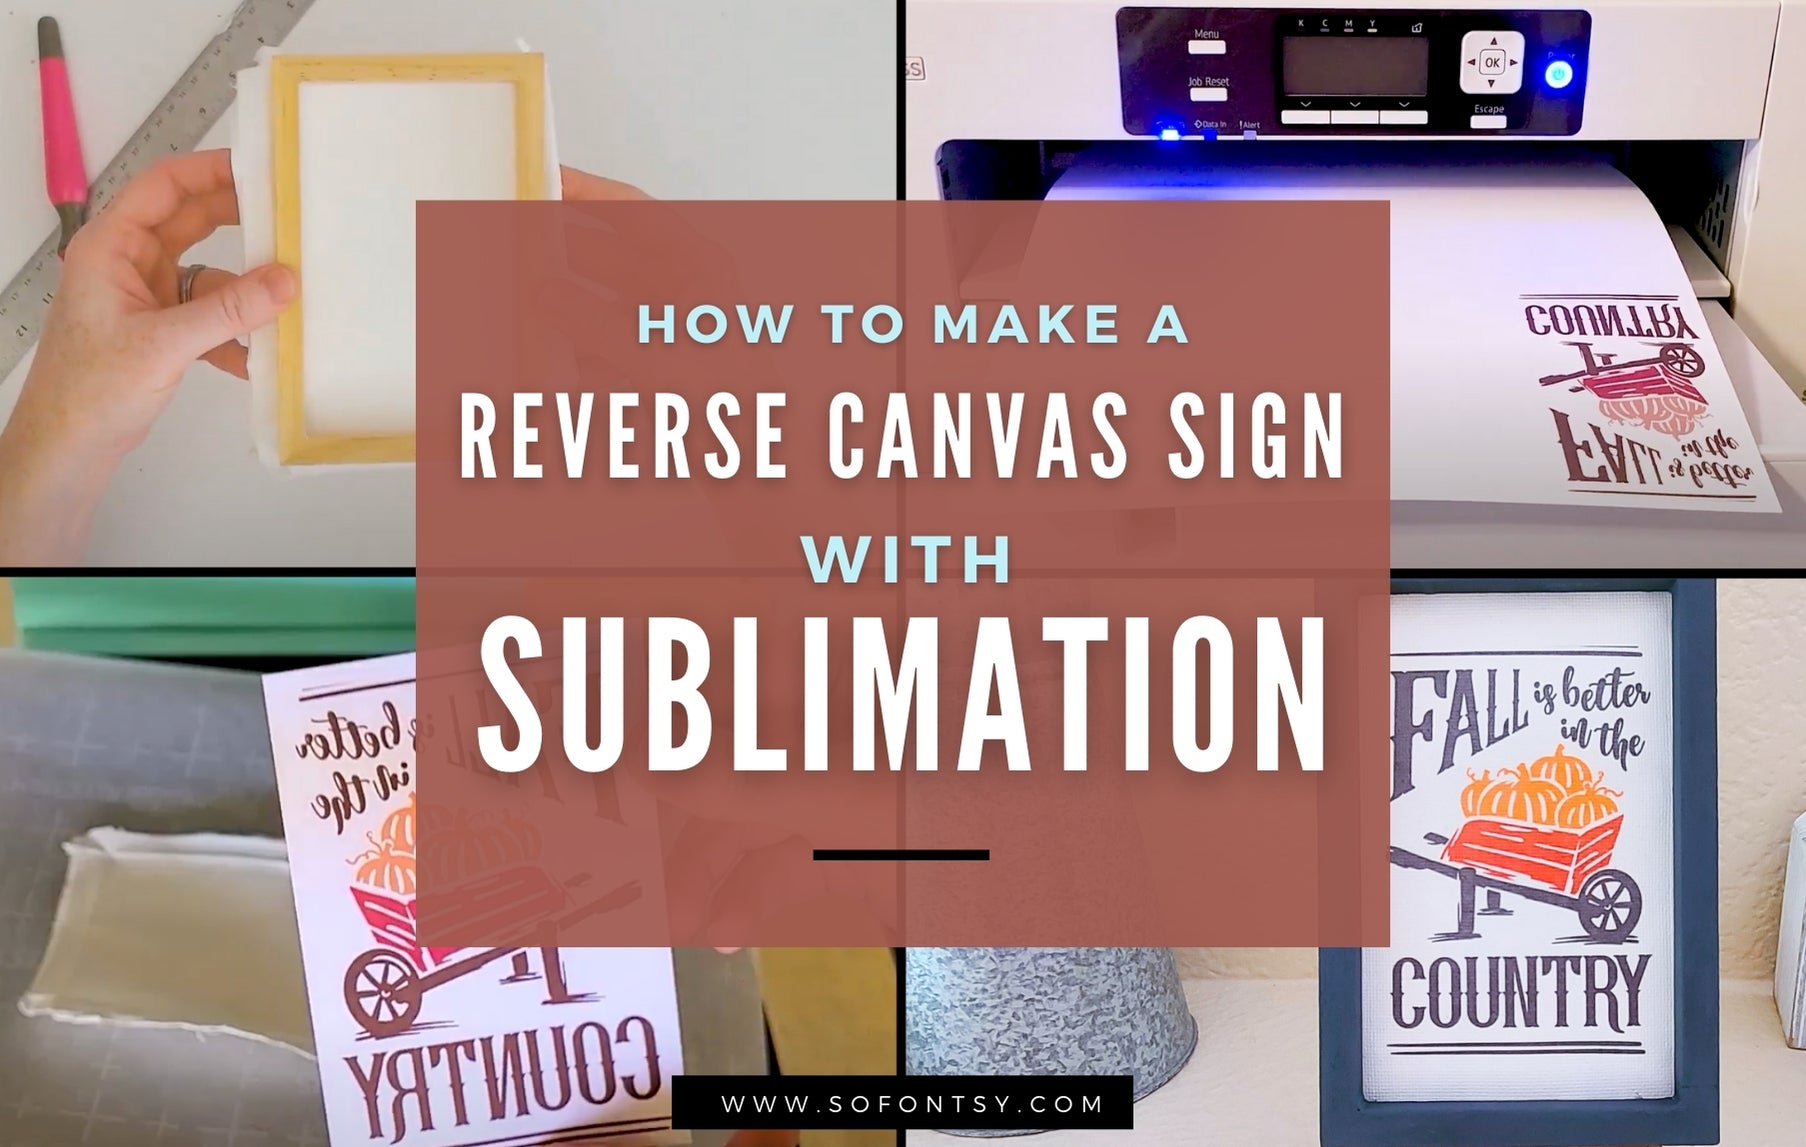 SUBLIMATION and REVERSE CANVAS How to Video Hacks in 2023